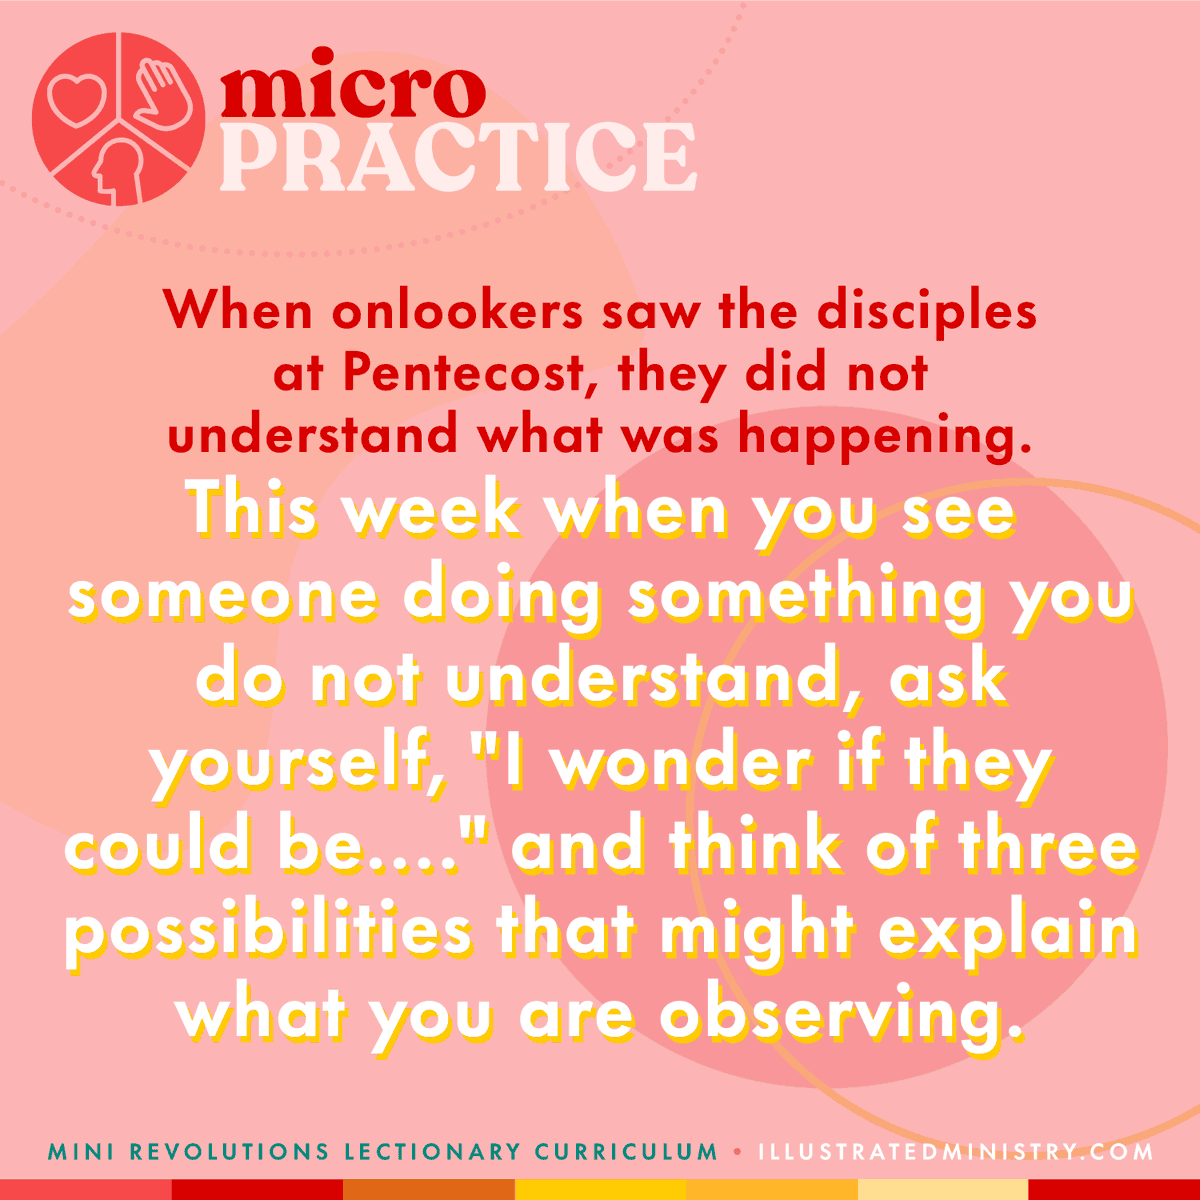 A micro practice from Illustrated Ministry reading: "When onlookers saw the disciples at Pentecost, they did not understand what was happening. This week when you see someone doing something you do not understand, ask yourself, "I wonder if they could be..." and think of three possibilities that might explain what you are observing.